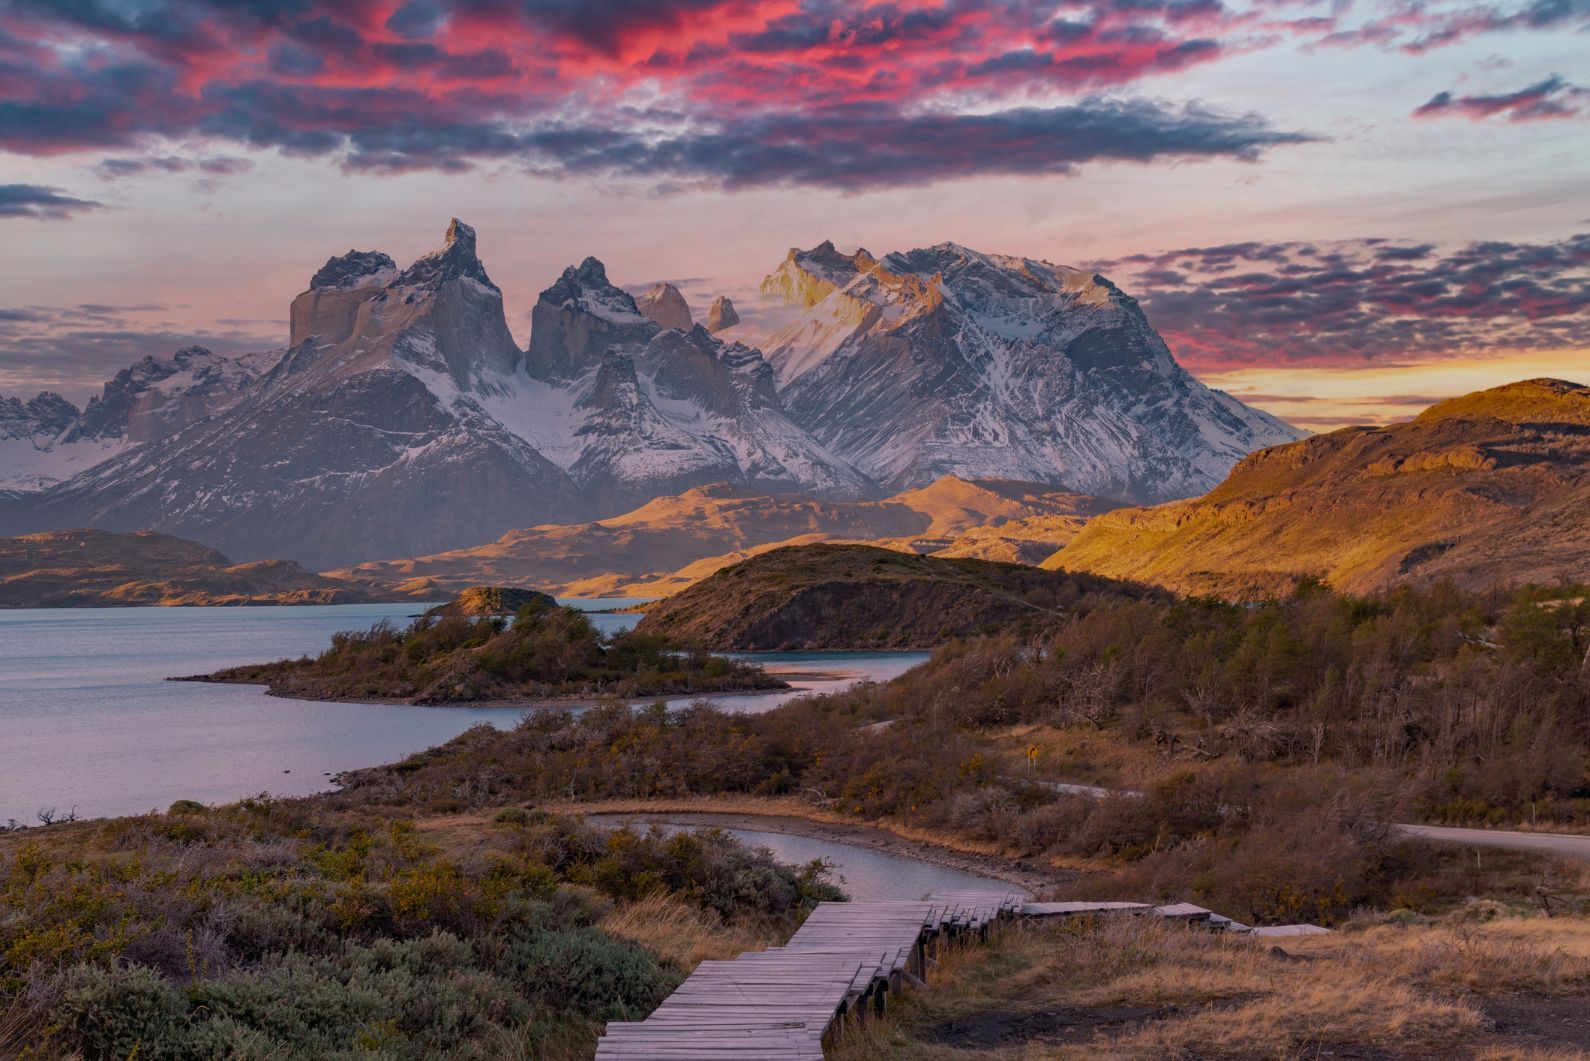 The Route of Parks: The 2,800-Km Hiking Trail Through Patagonia